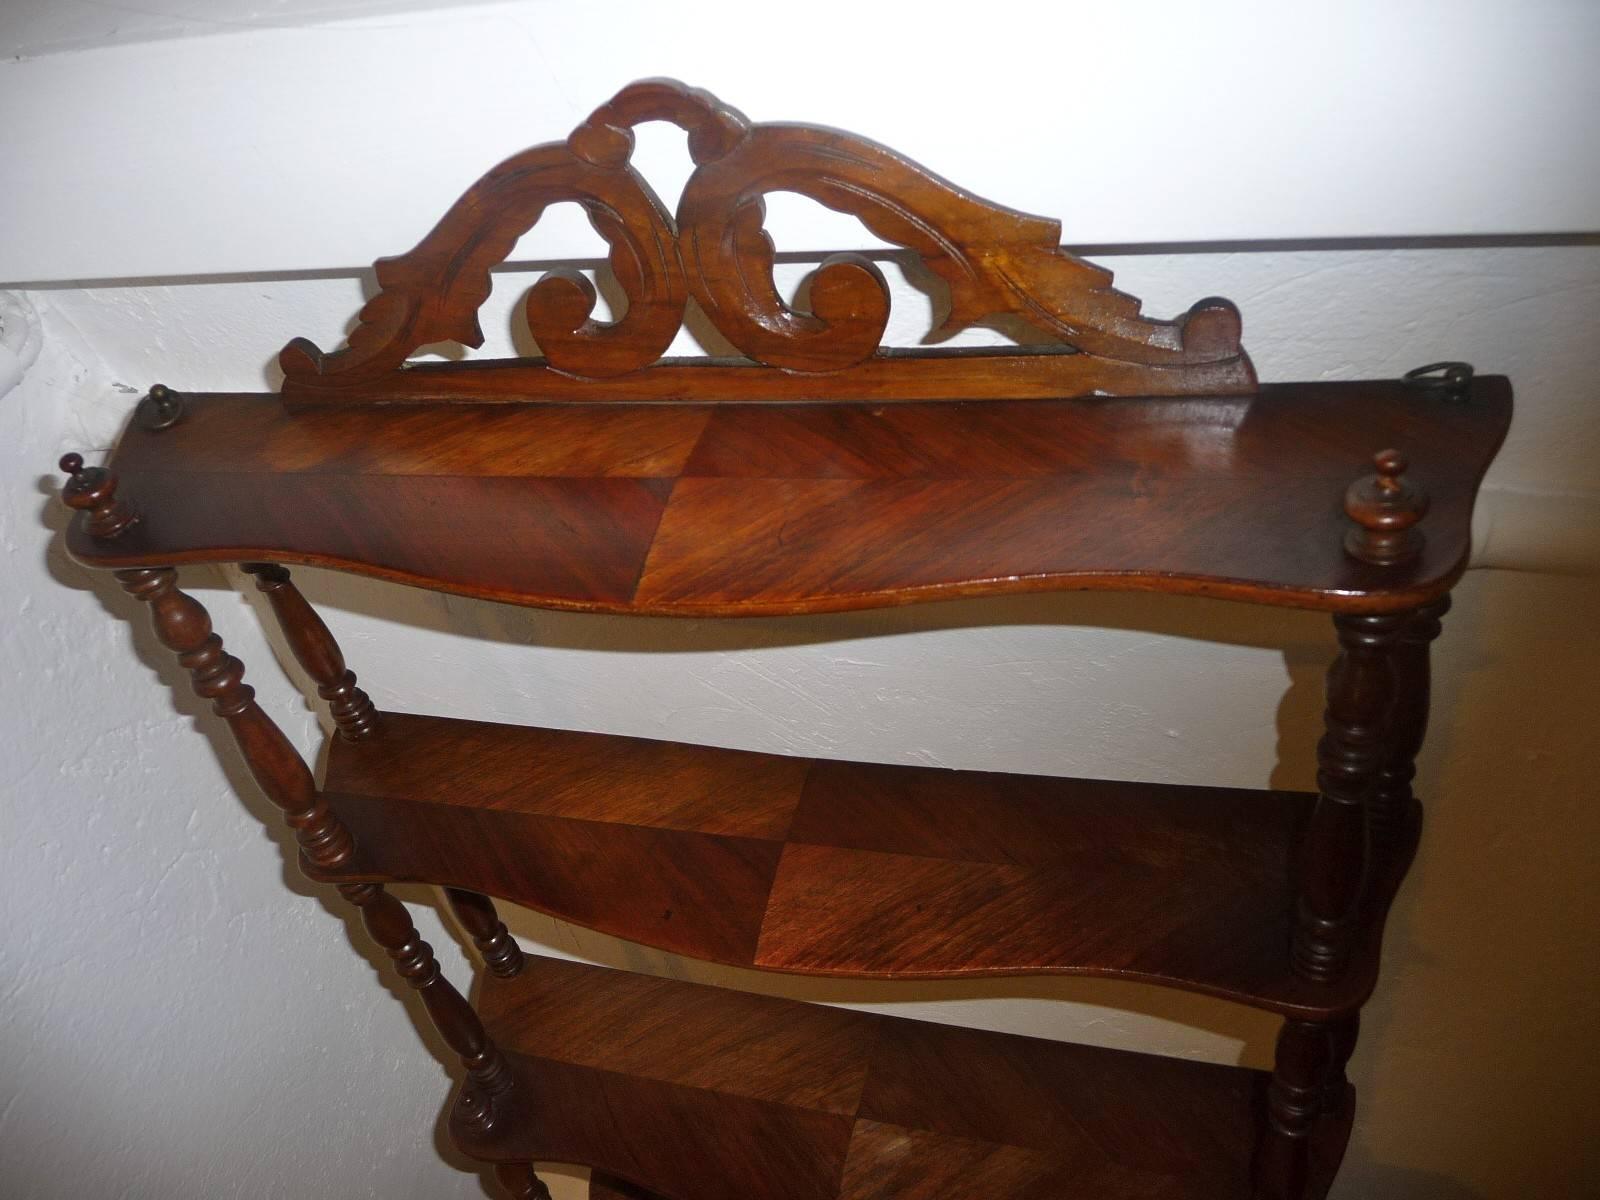 A handsome and nicely proportioned walnut set of shelves joined by turned columns. 
From France in the second part of the 19th century.
Free shipping.